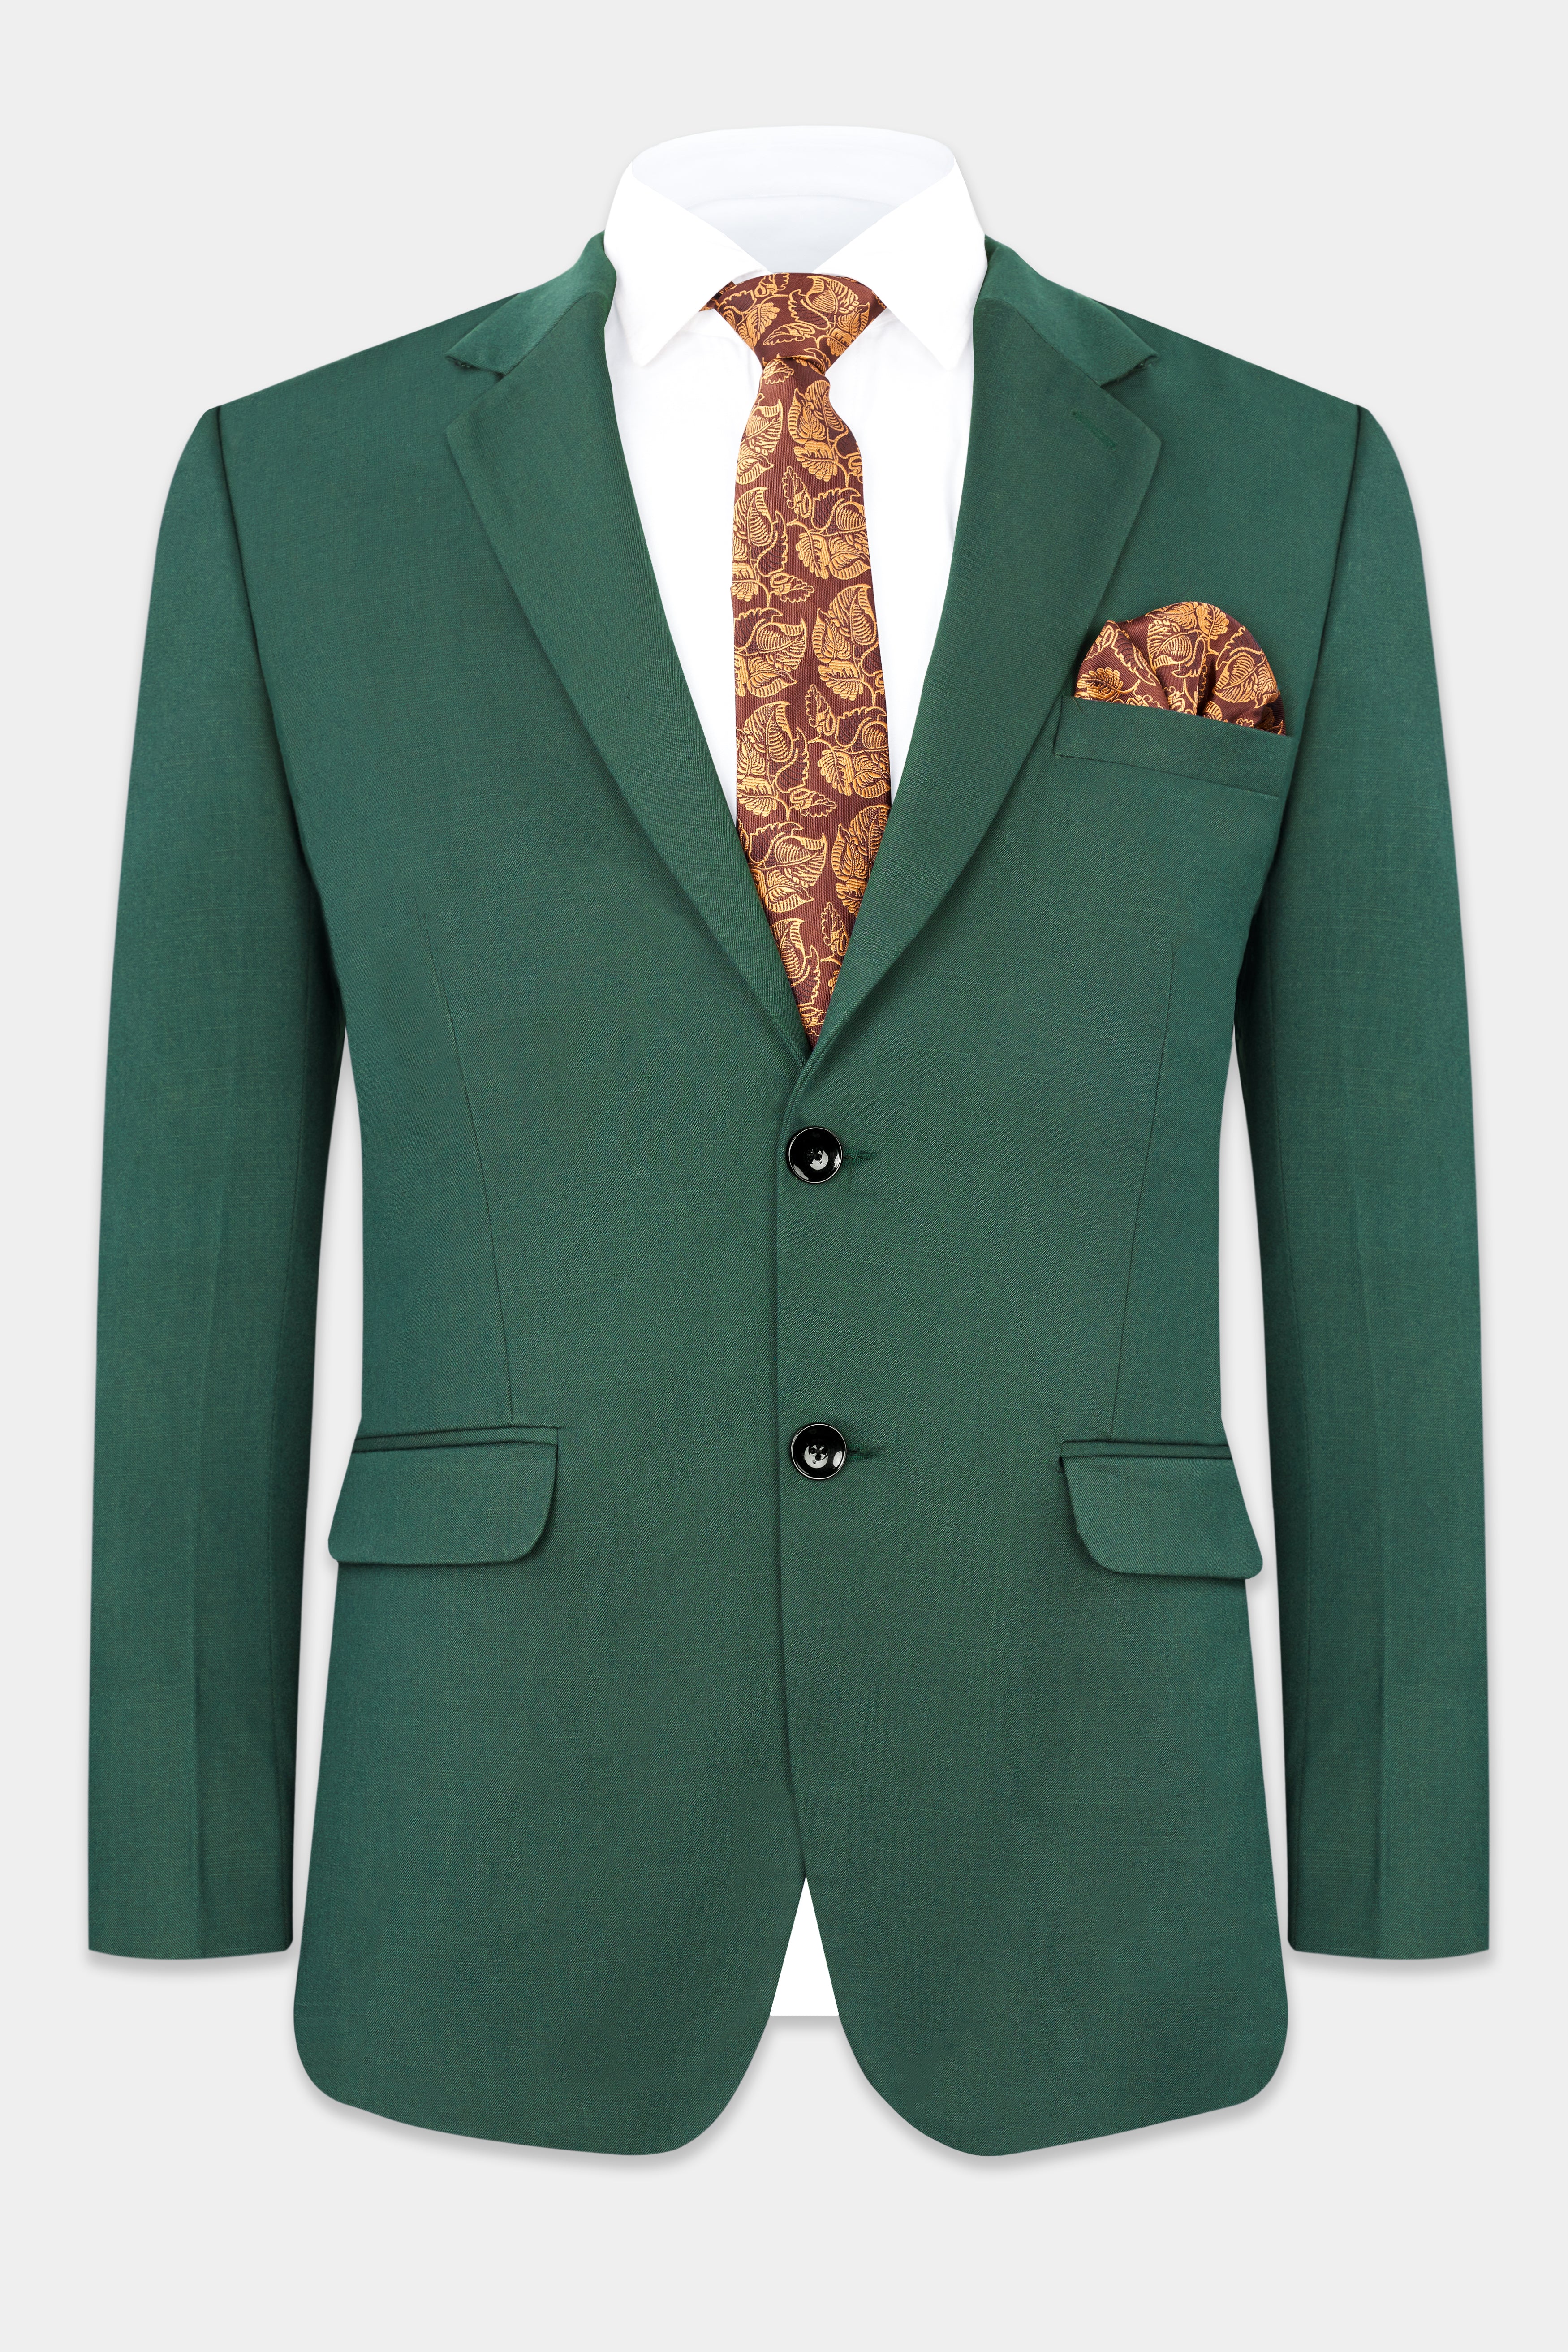 Everglade Green Wool Rich Single Breasted Stretchable traveler Suit